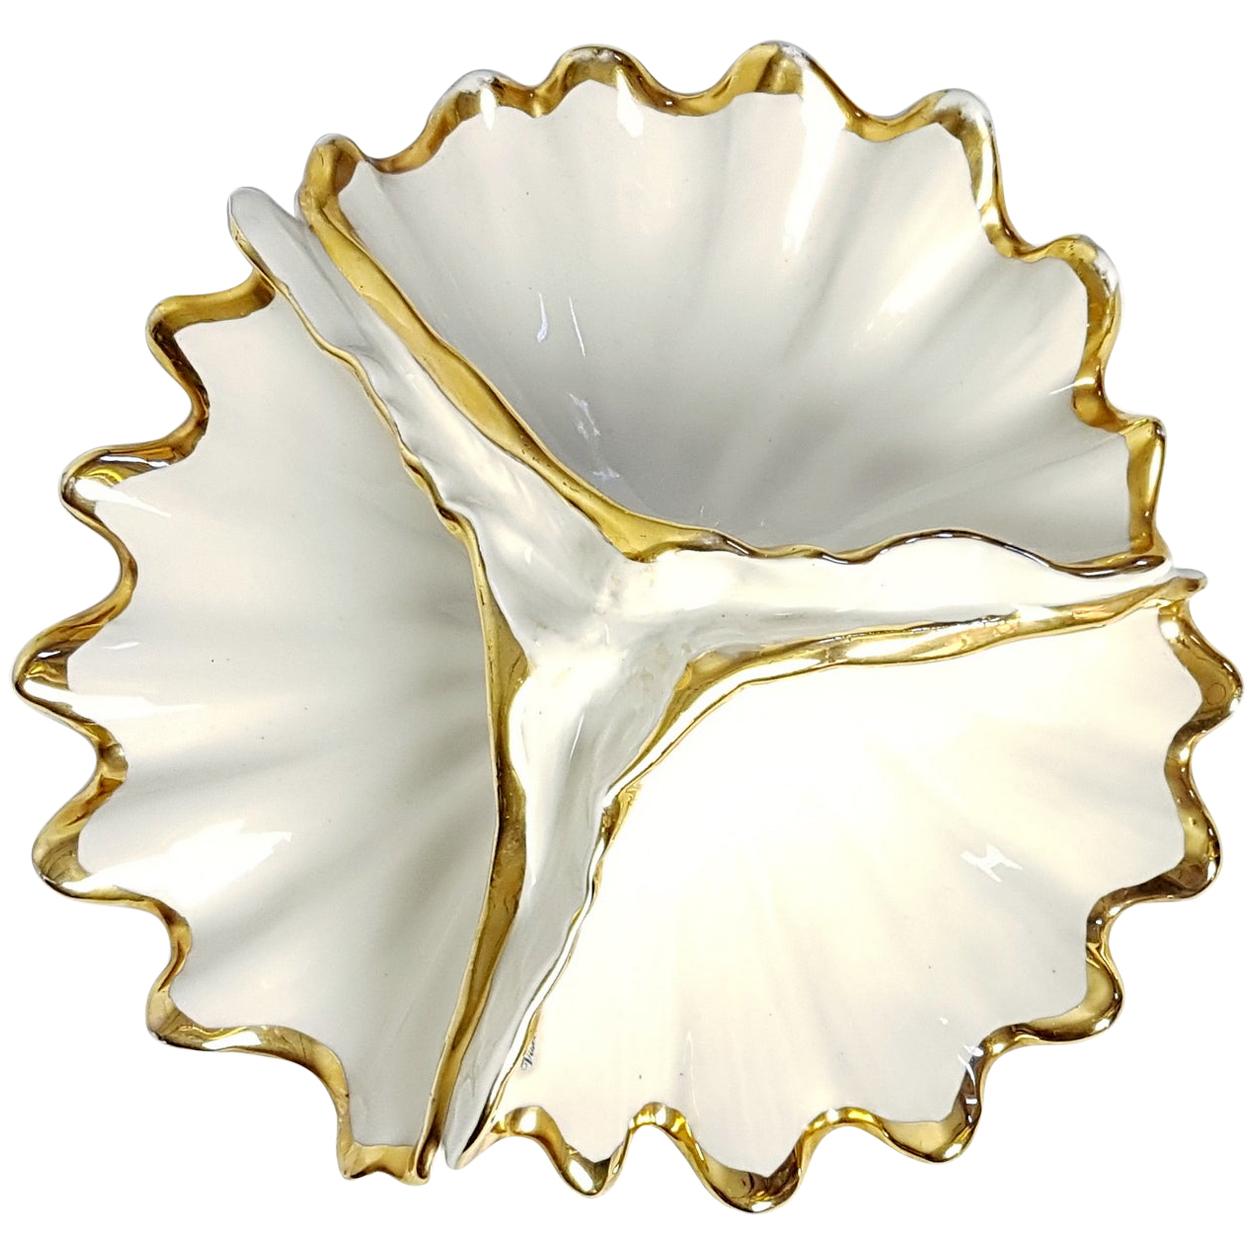 Clam Shell Porcelain Bowl by Capodimonte, Italy